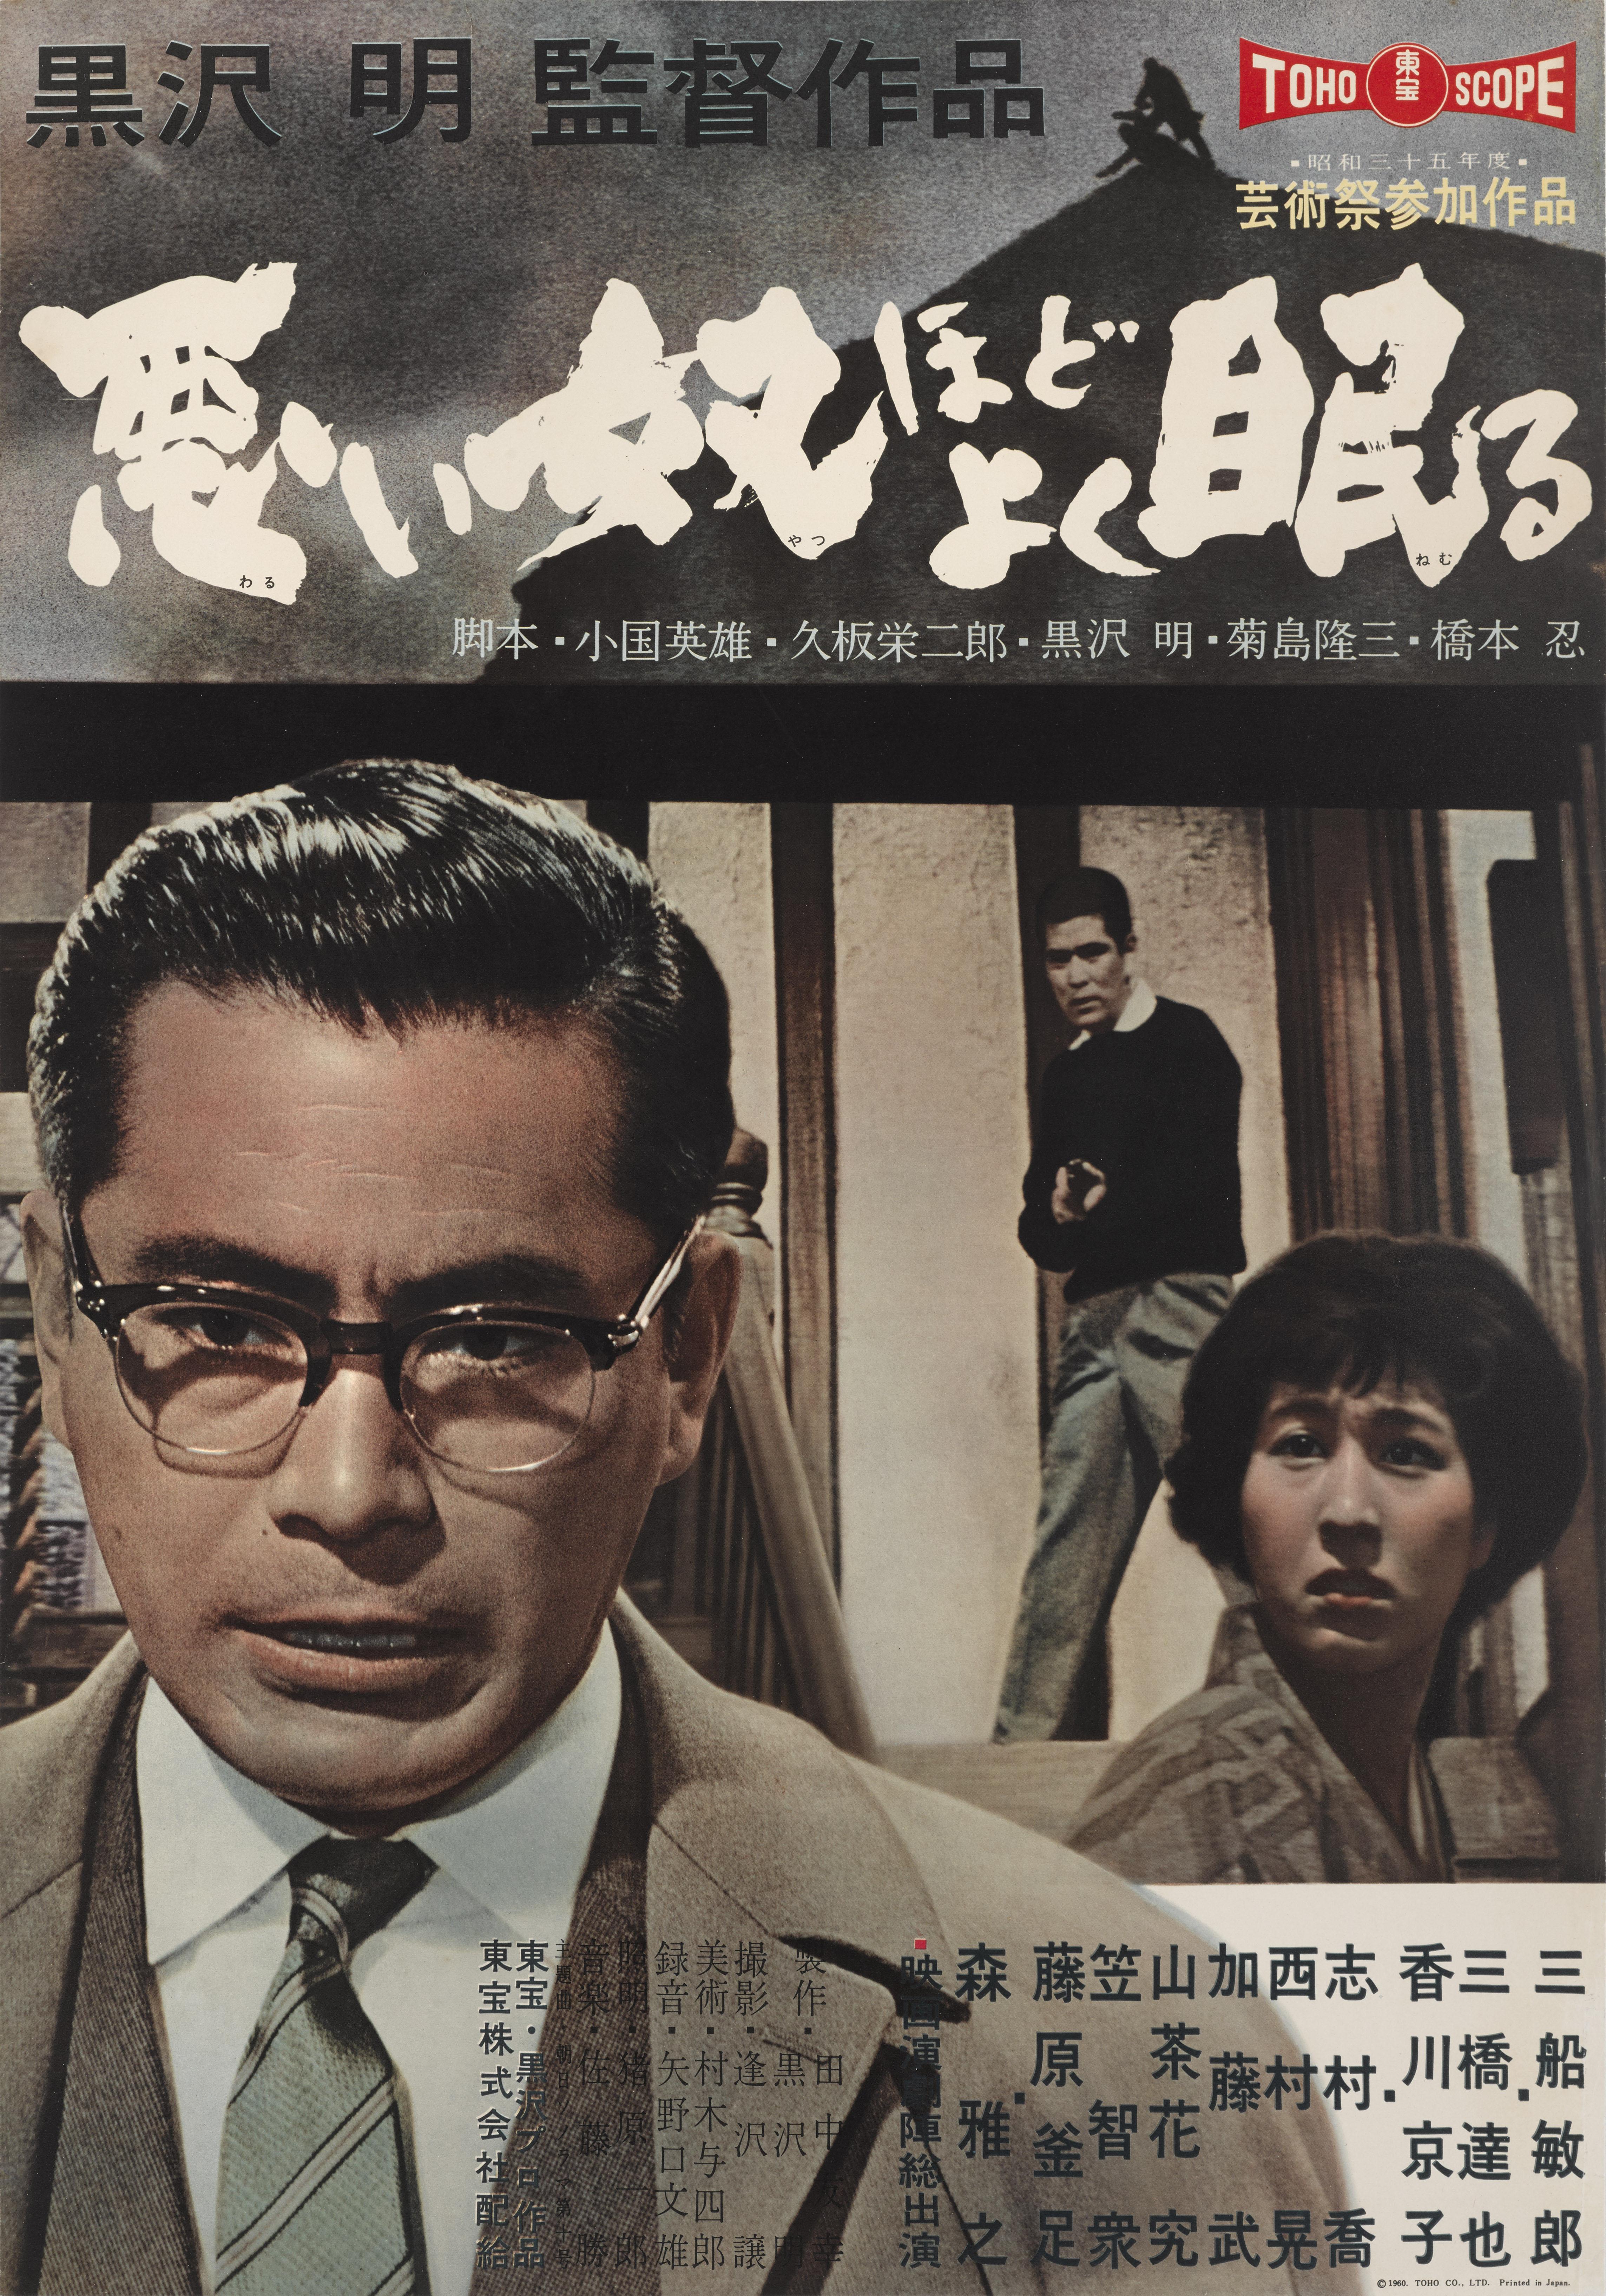 Original Japanese film poster for Akira Kurosawa 1963 crime drama.
This film starred Toshiro Mifune and Takashi Shimura.
This poster is unfolded and conservation linen backed and it would be shipped rolled in a very strong tube.